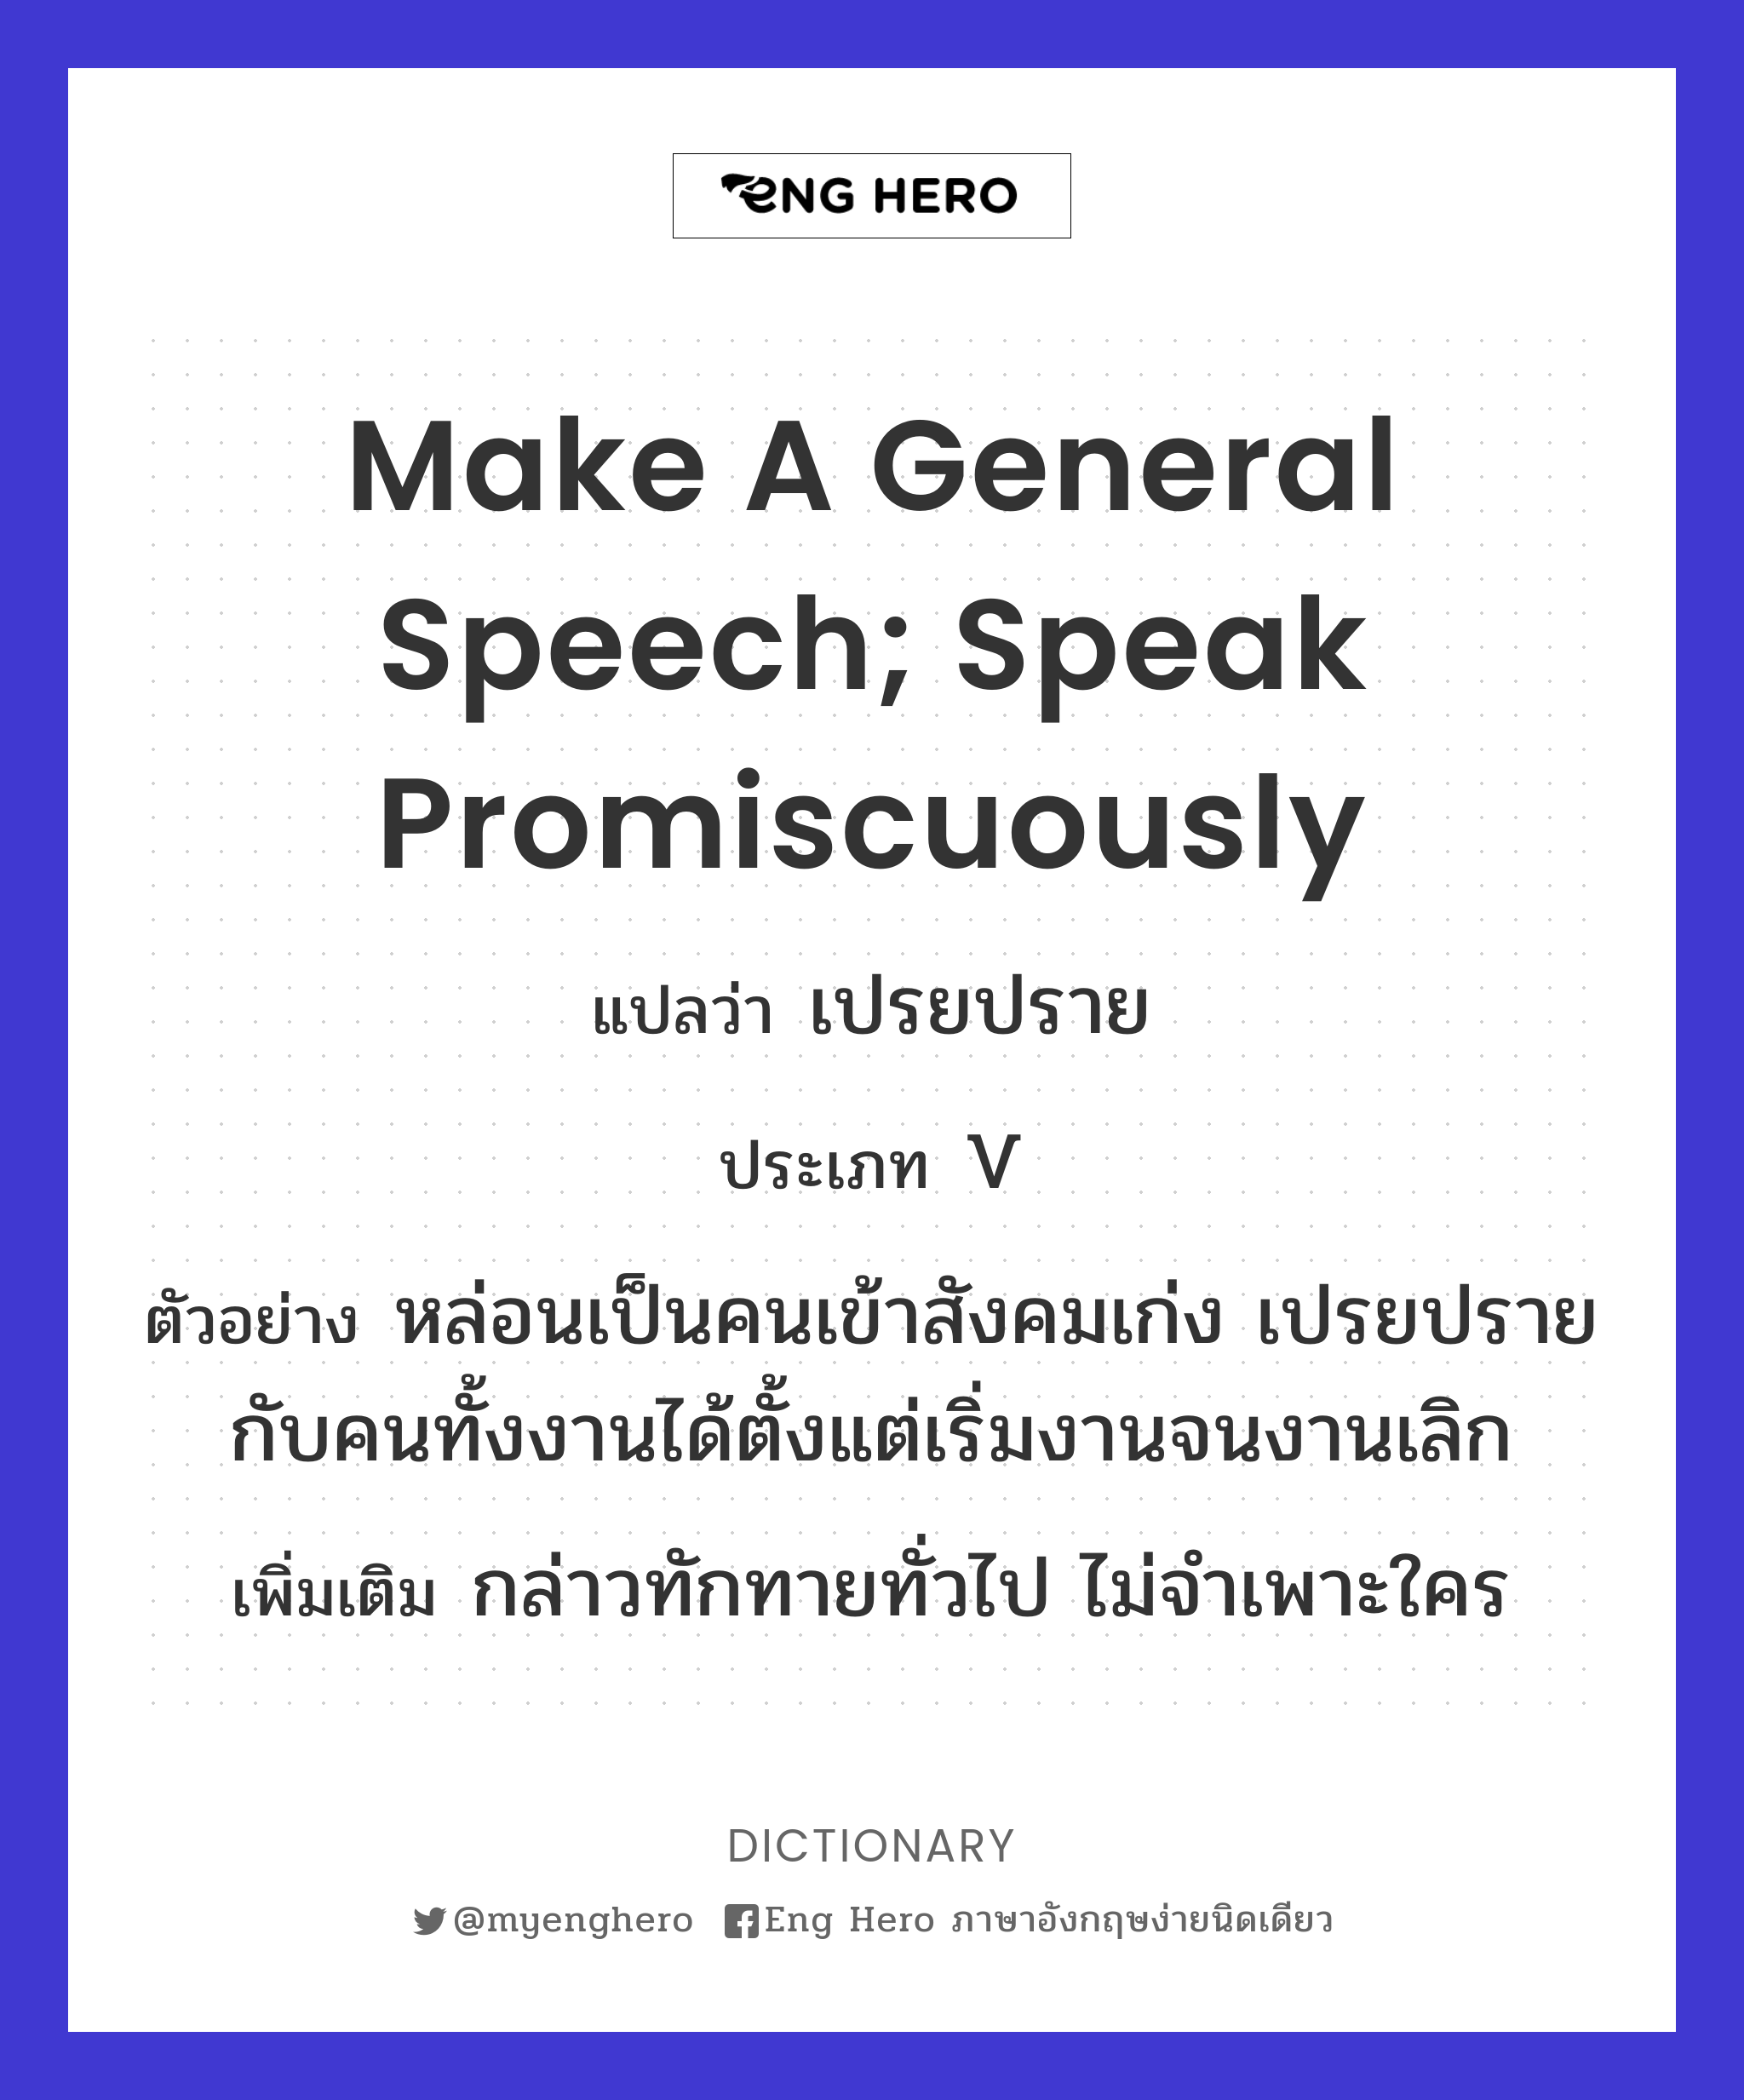 make a general speech; speak promiscuously